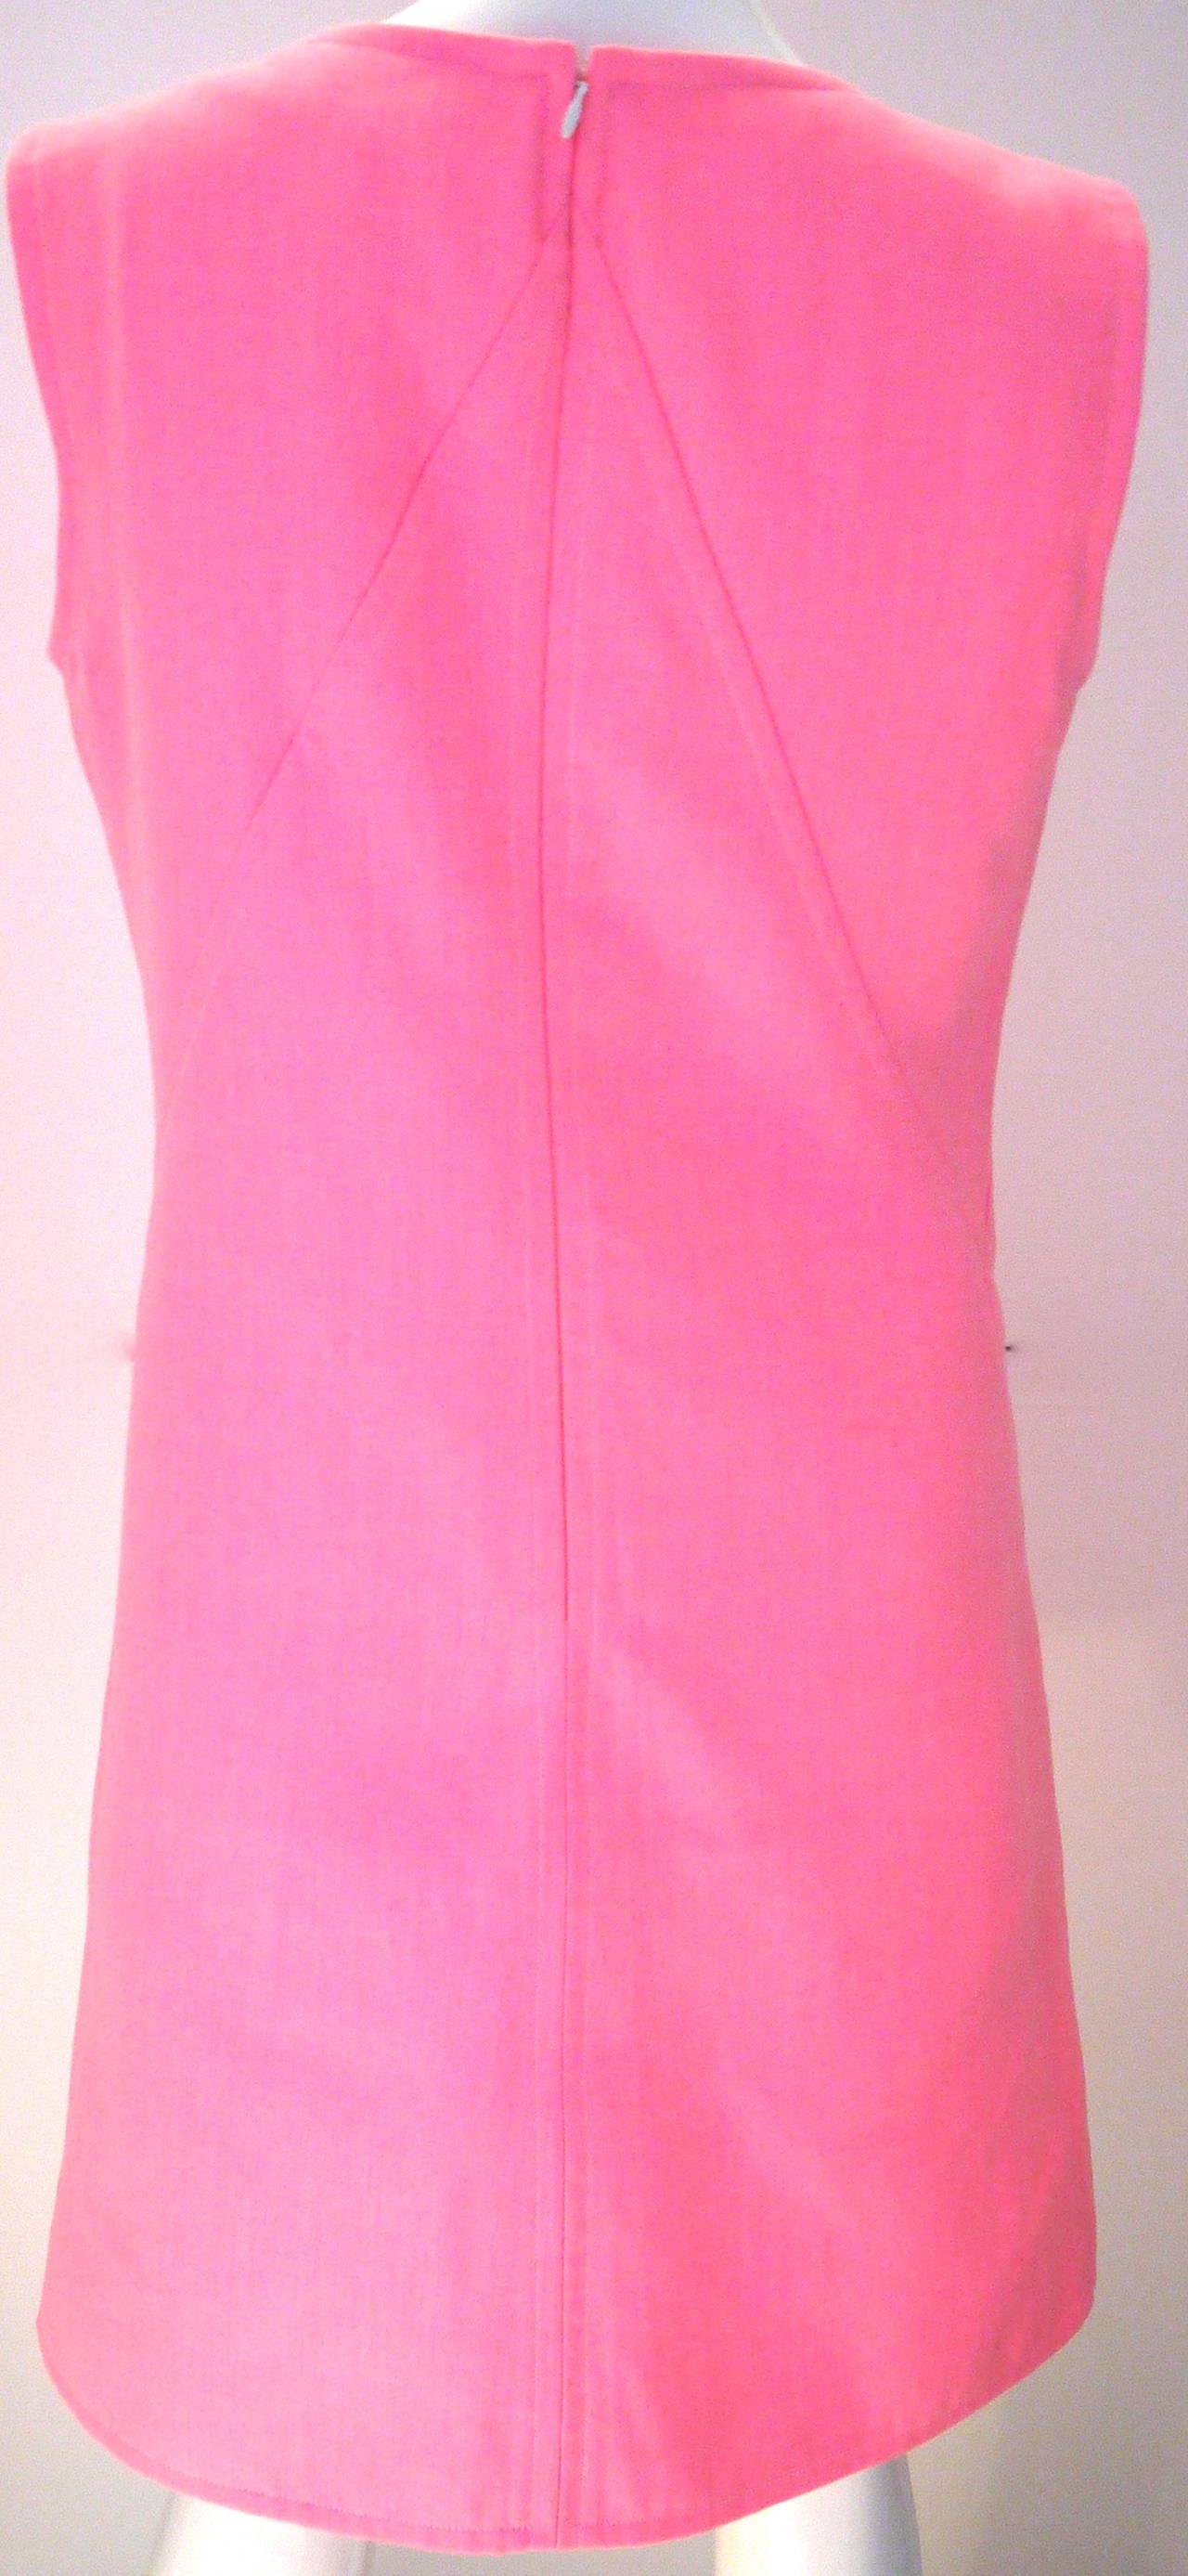 New Courreges Pink Dress - Size 40 In New Condition For Sale In Boca Raton, FL